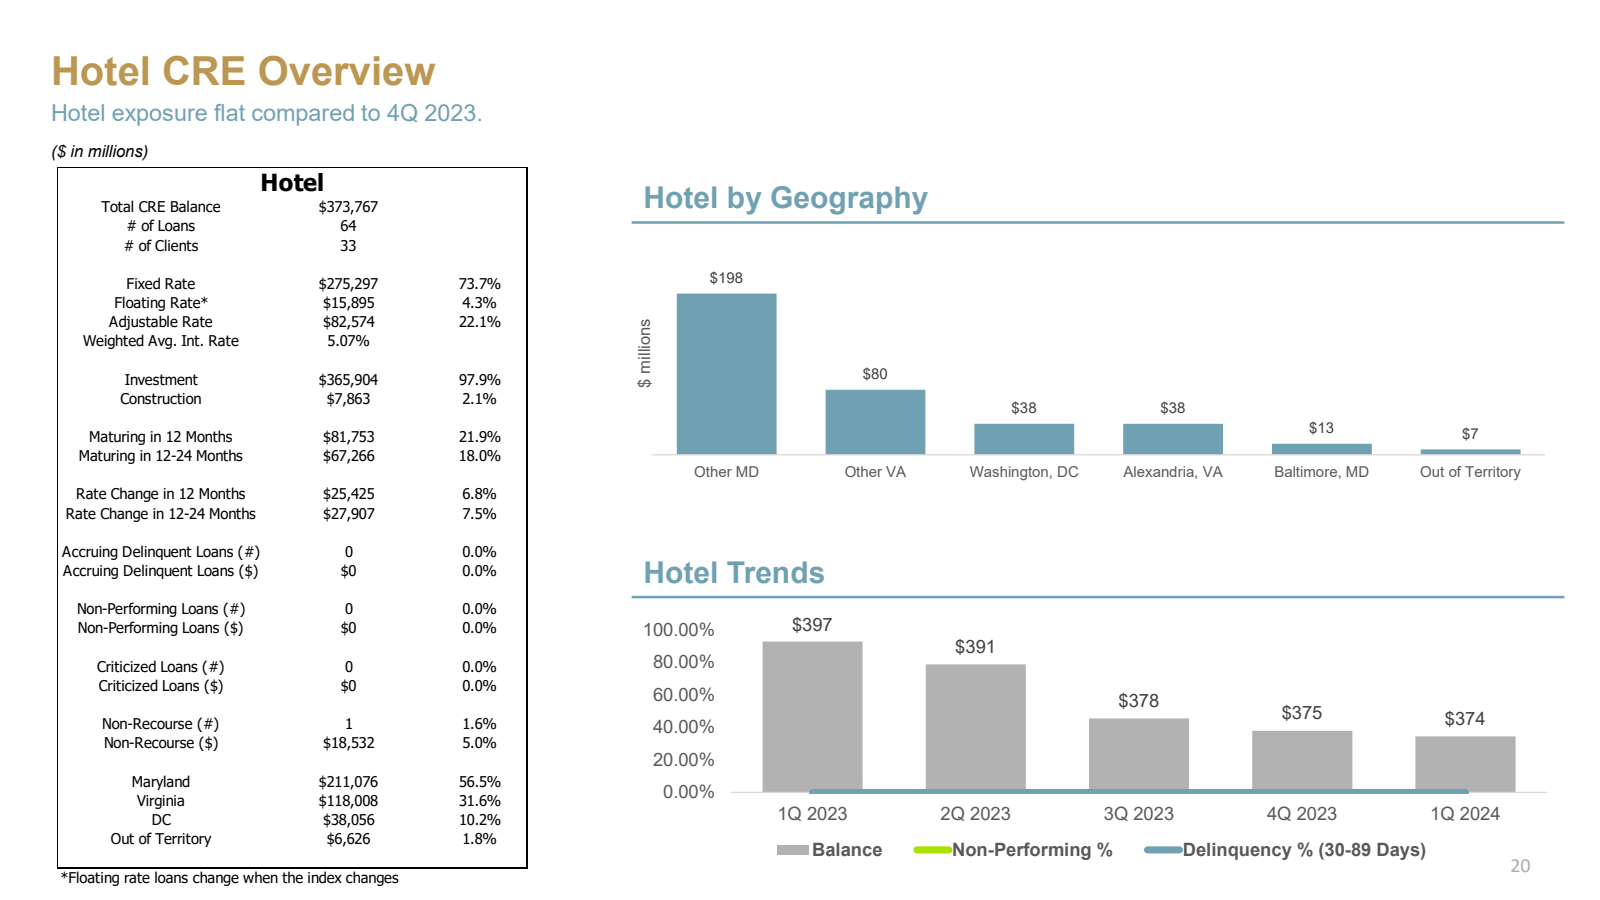 Hotel CRE Overview 
